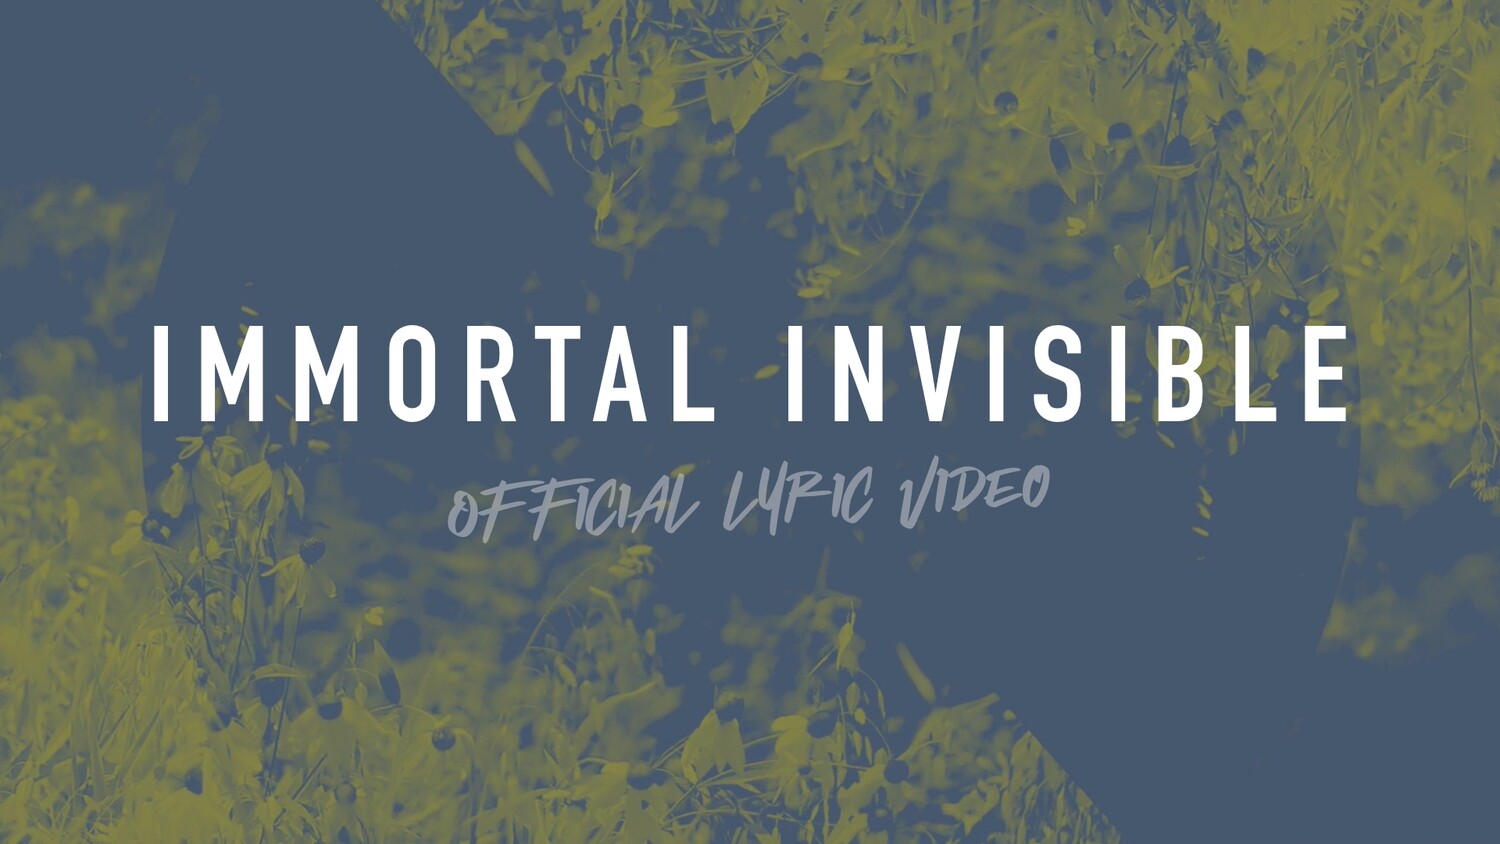 Immortal, Invisible (Full Band Lyric Video)